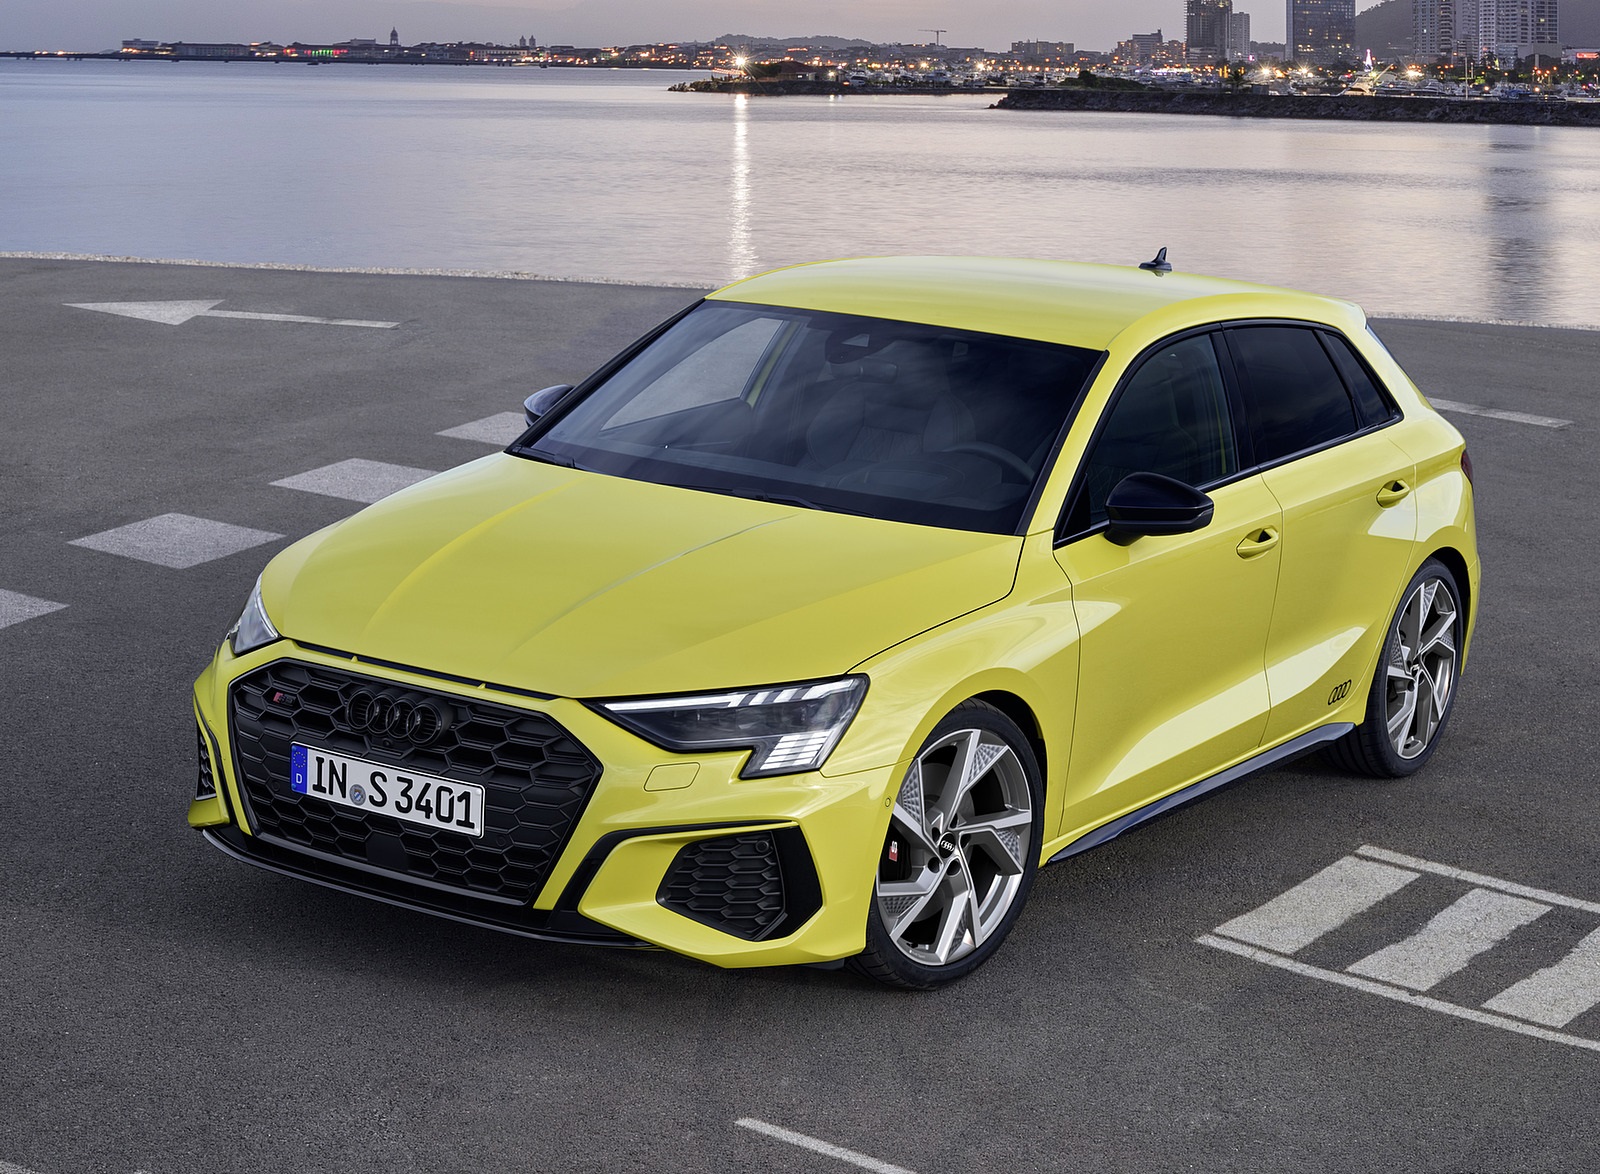 2021 Audi S3 Sportback (Color: Python Yellow) Front Three-Quarter Wallpapers #11 of 37